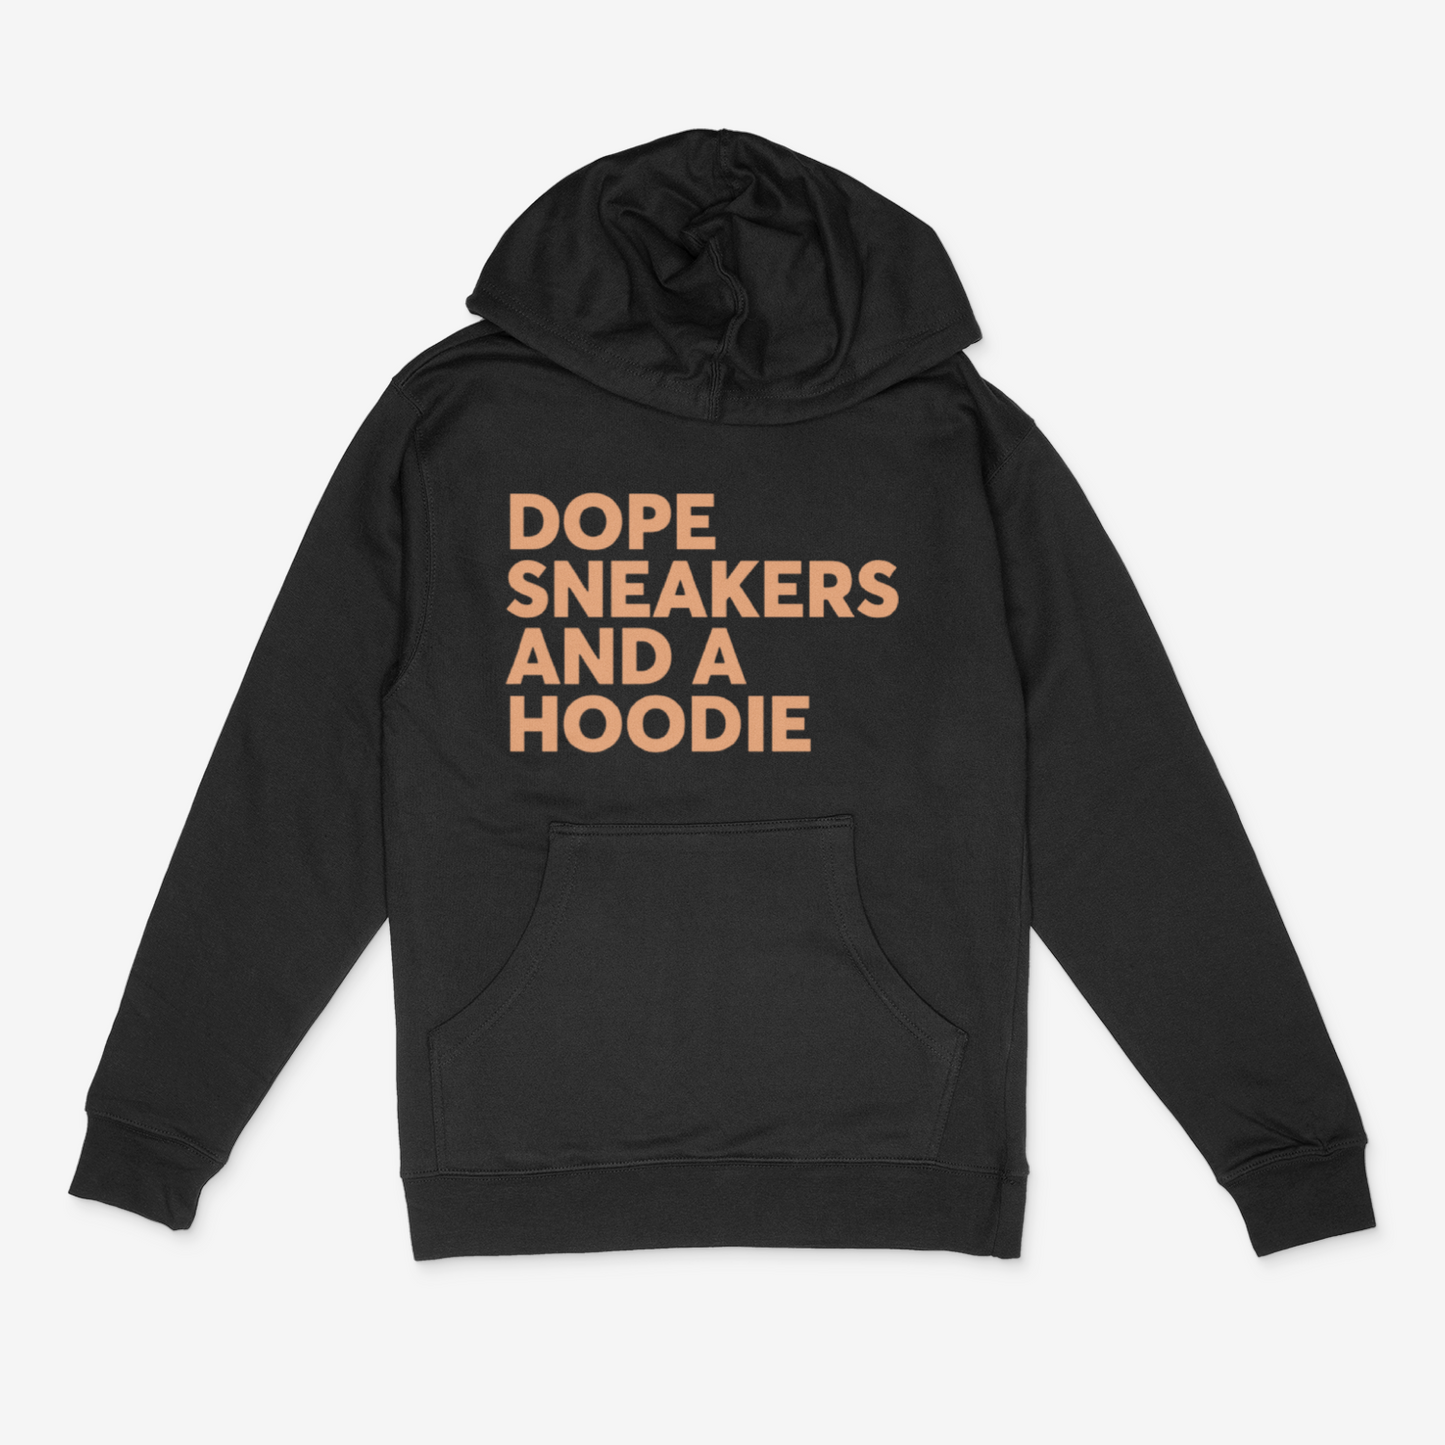 Dope Sneakers and a Hoodie (Tan)